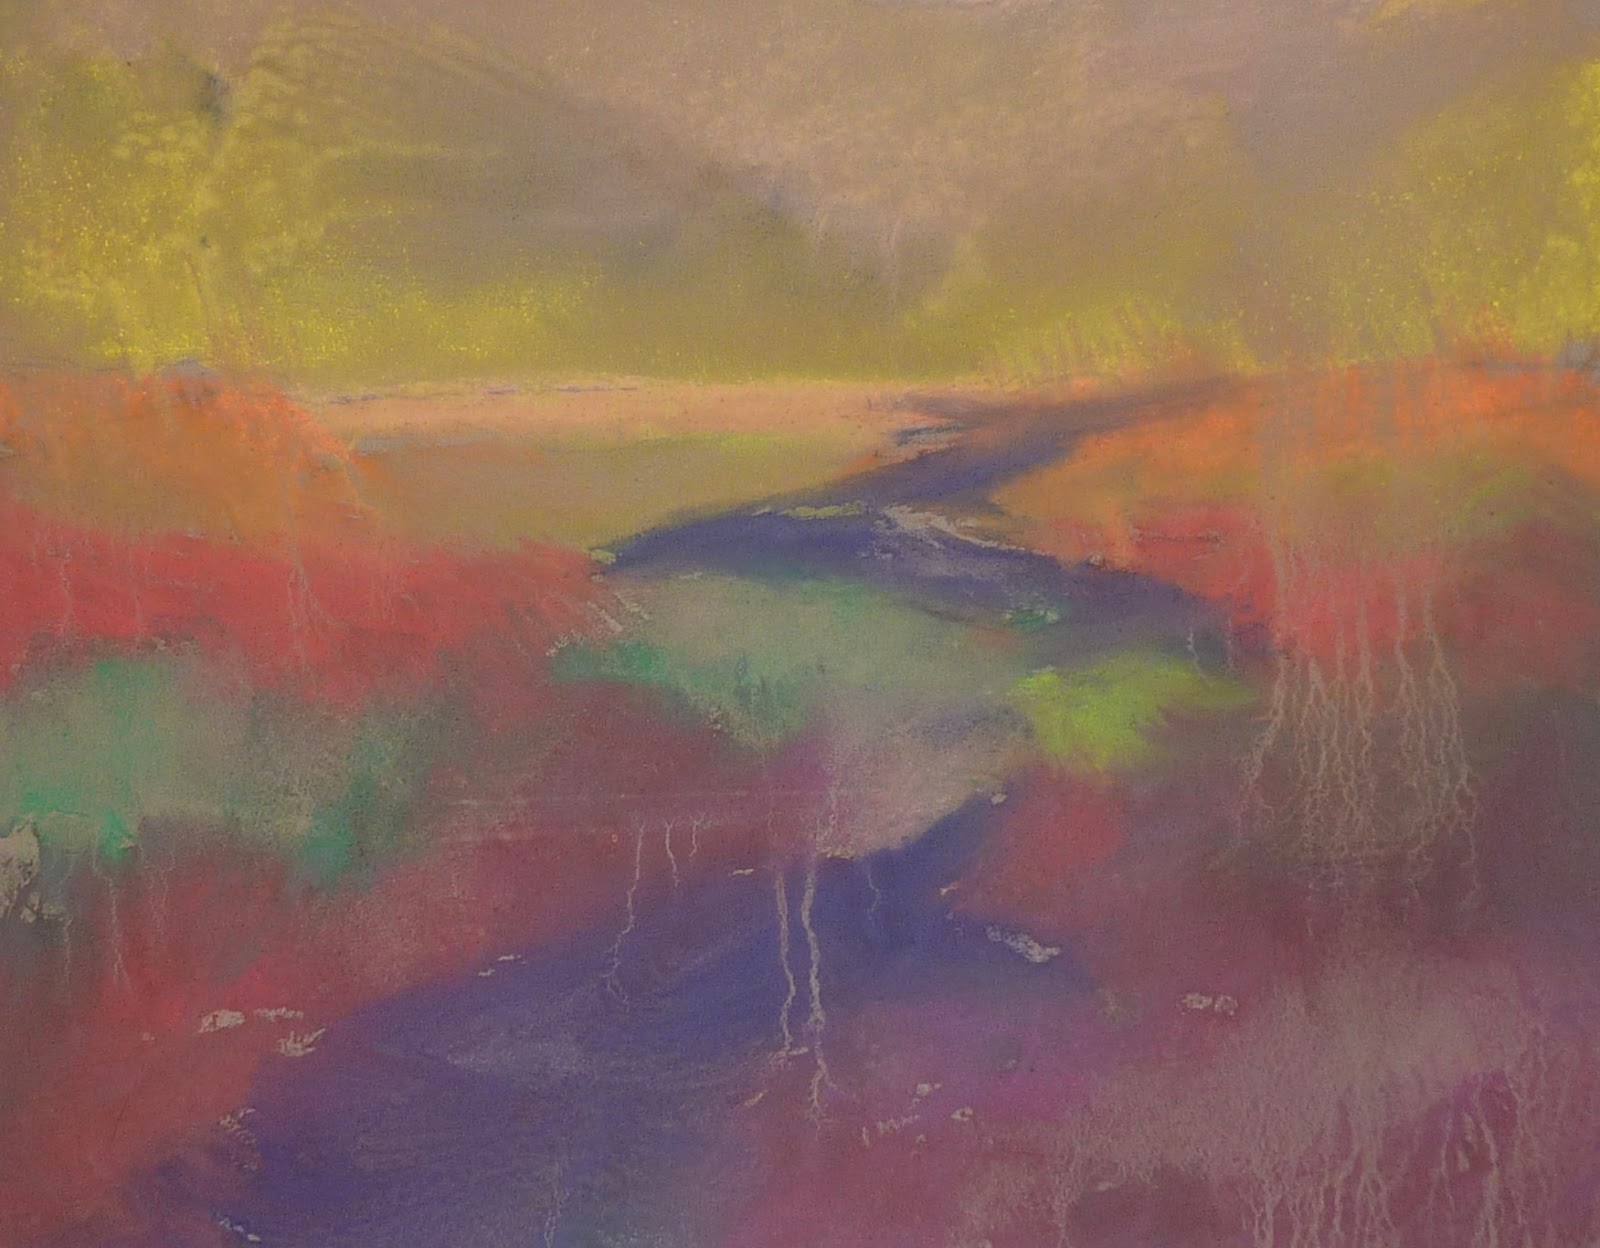 Painting My World: New  Video: Underpainting with Inktense Blocks